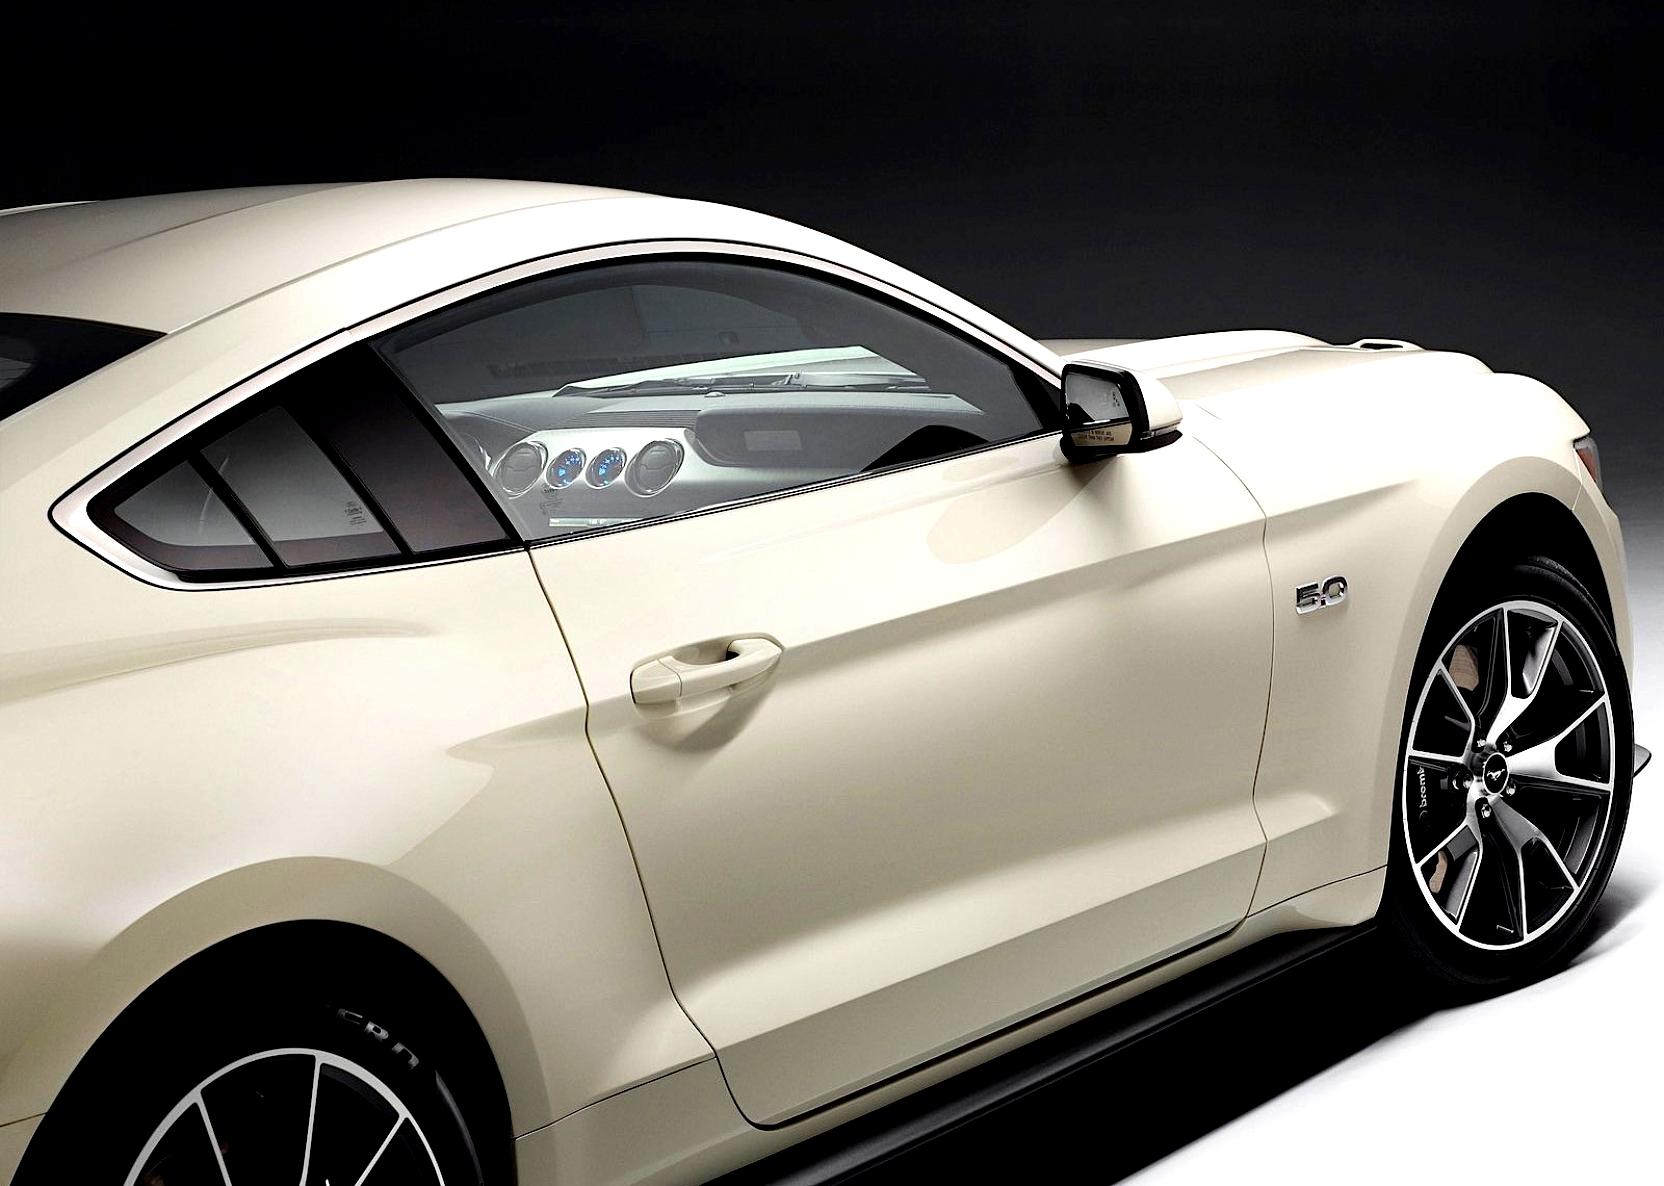 Ford Mustang 2014 #41